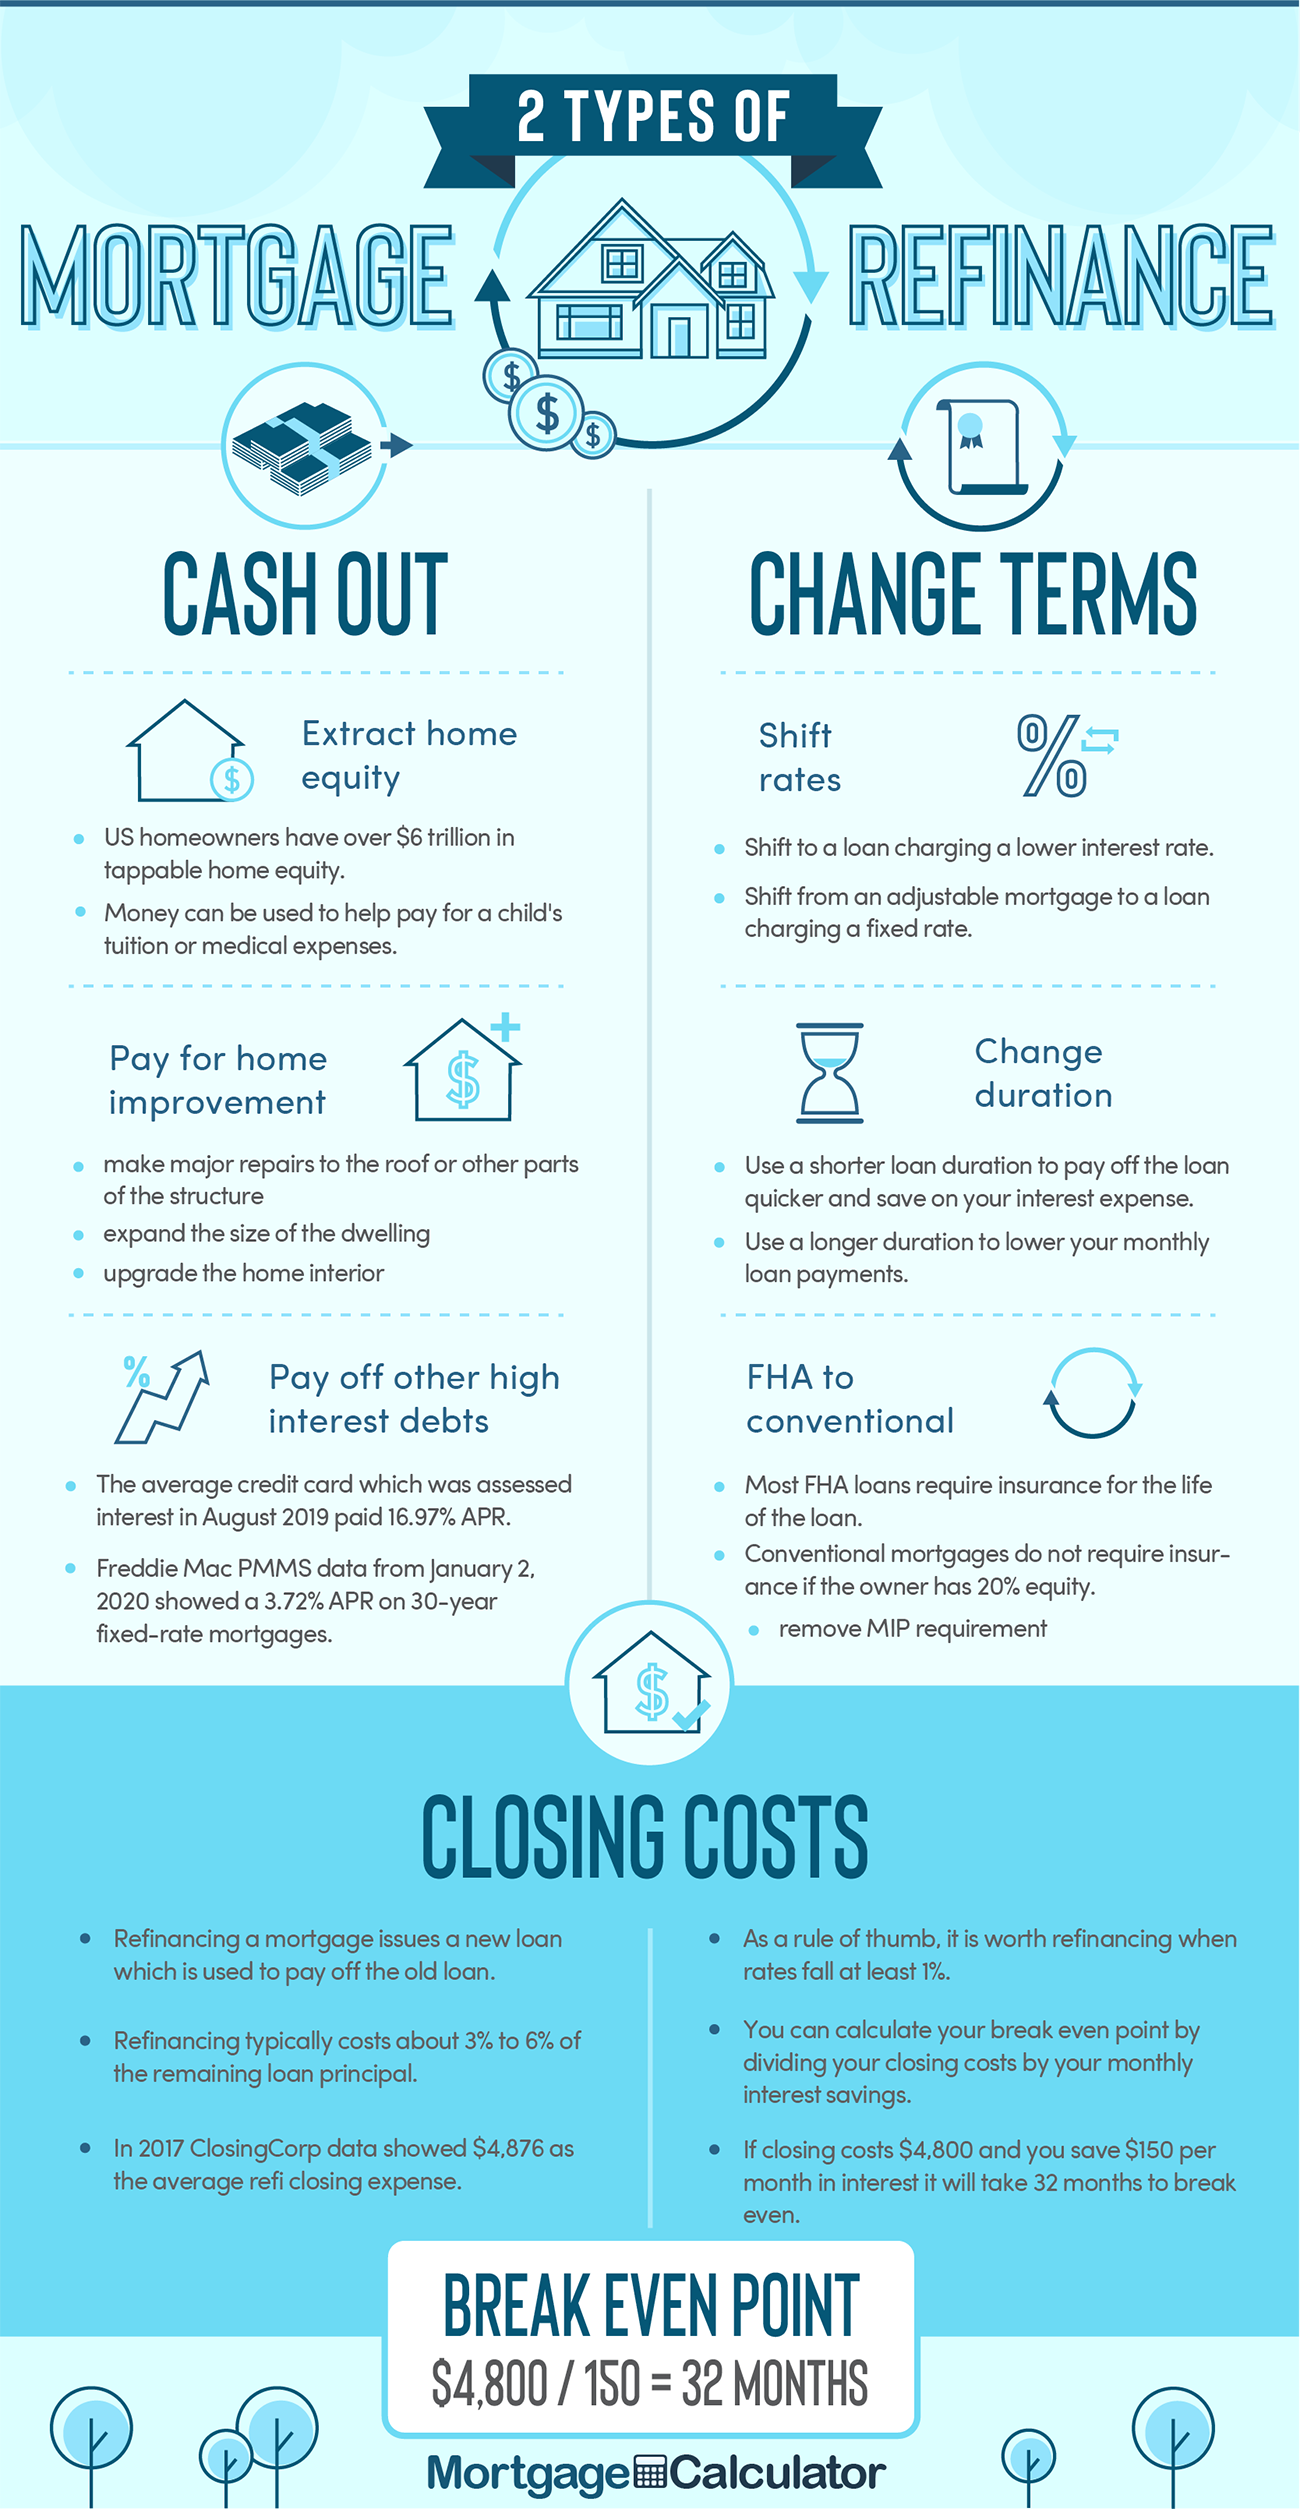 Should I Refinance My Mortgage? Beginner's Guide to Refinancing Your Home Loan